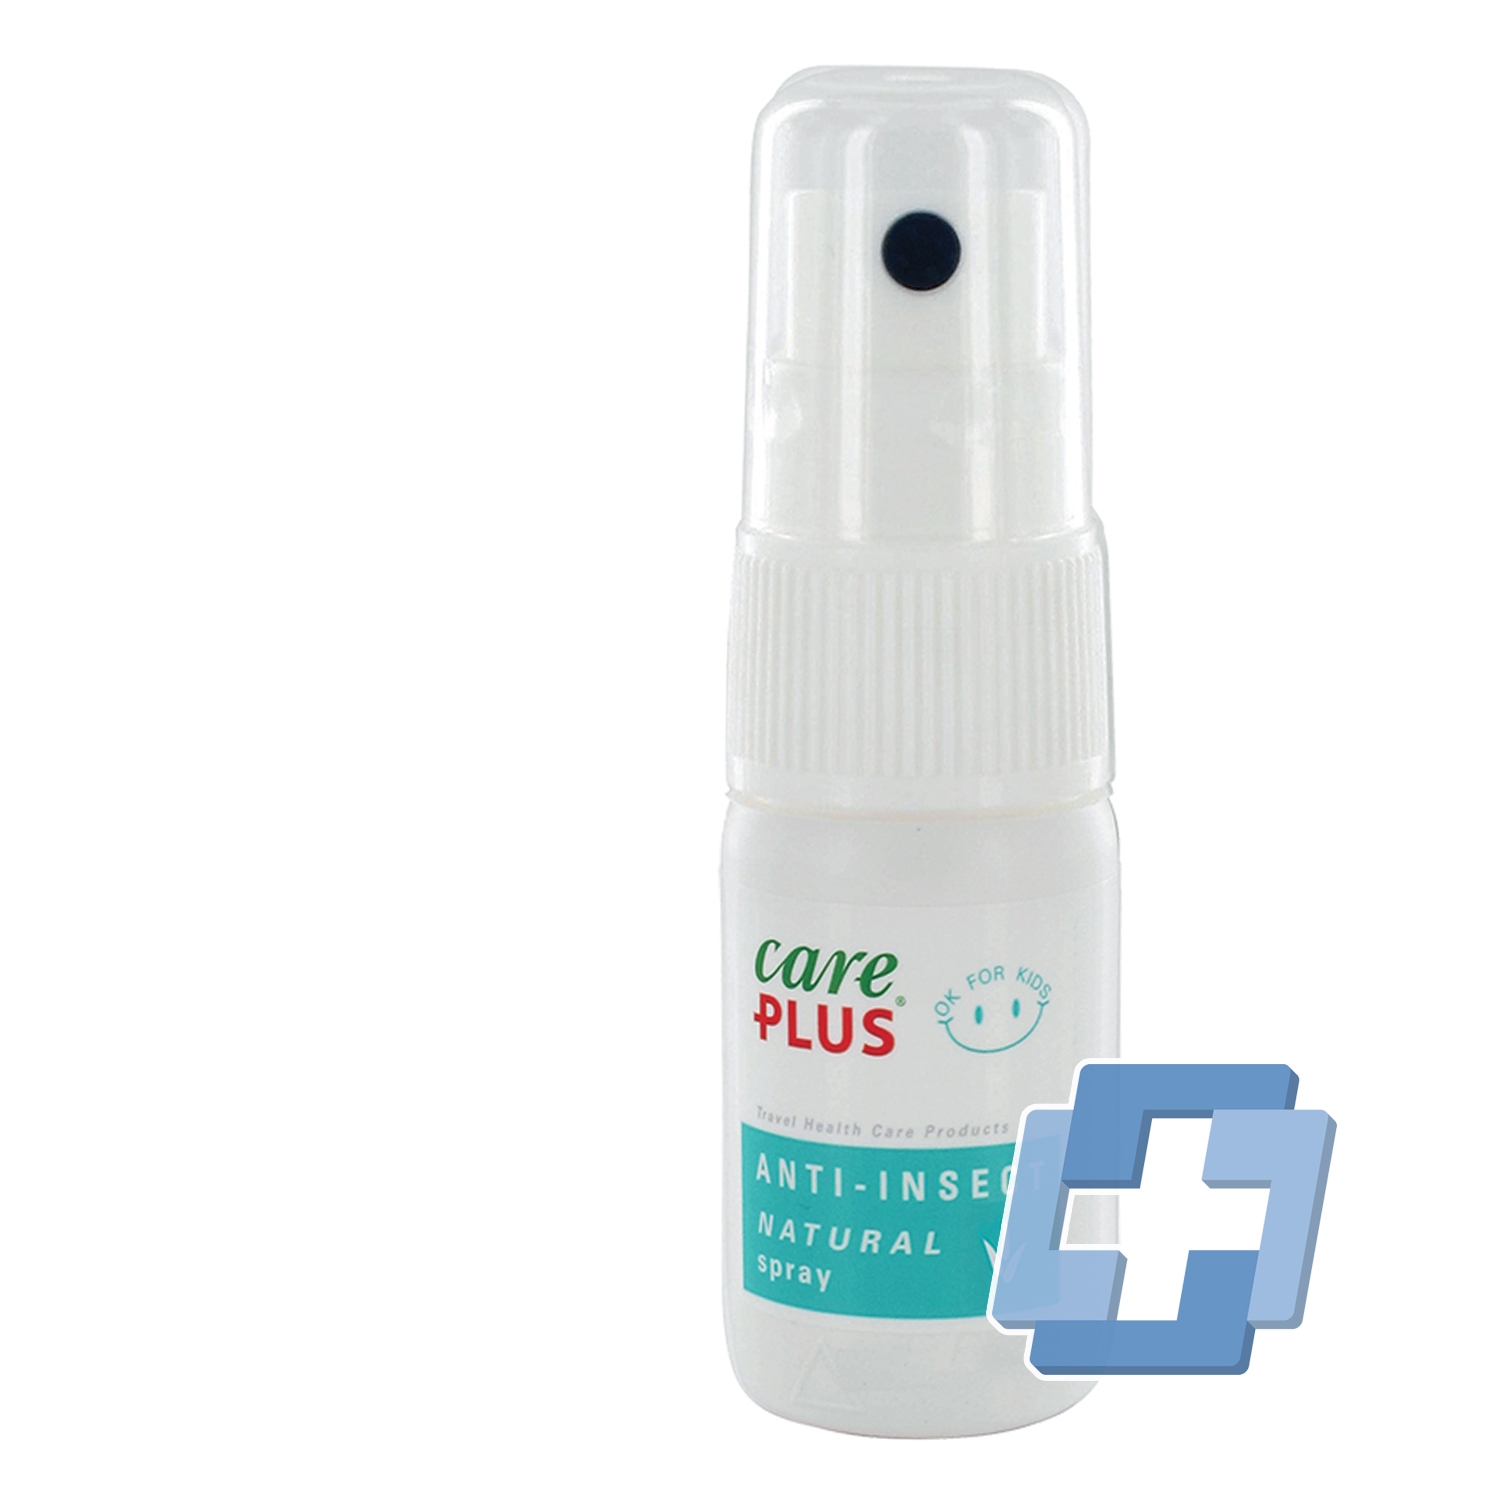 CARE PLUS NATURAL A INSECT SPR 15ML